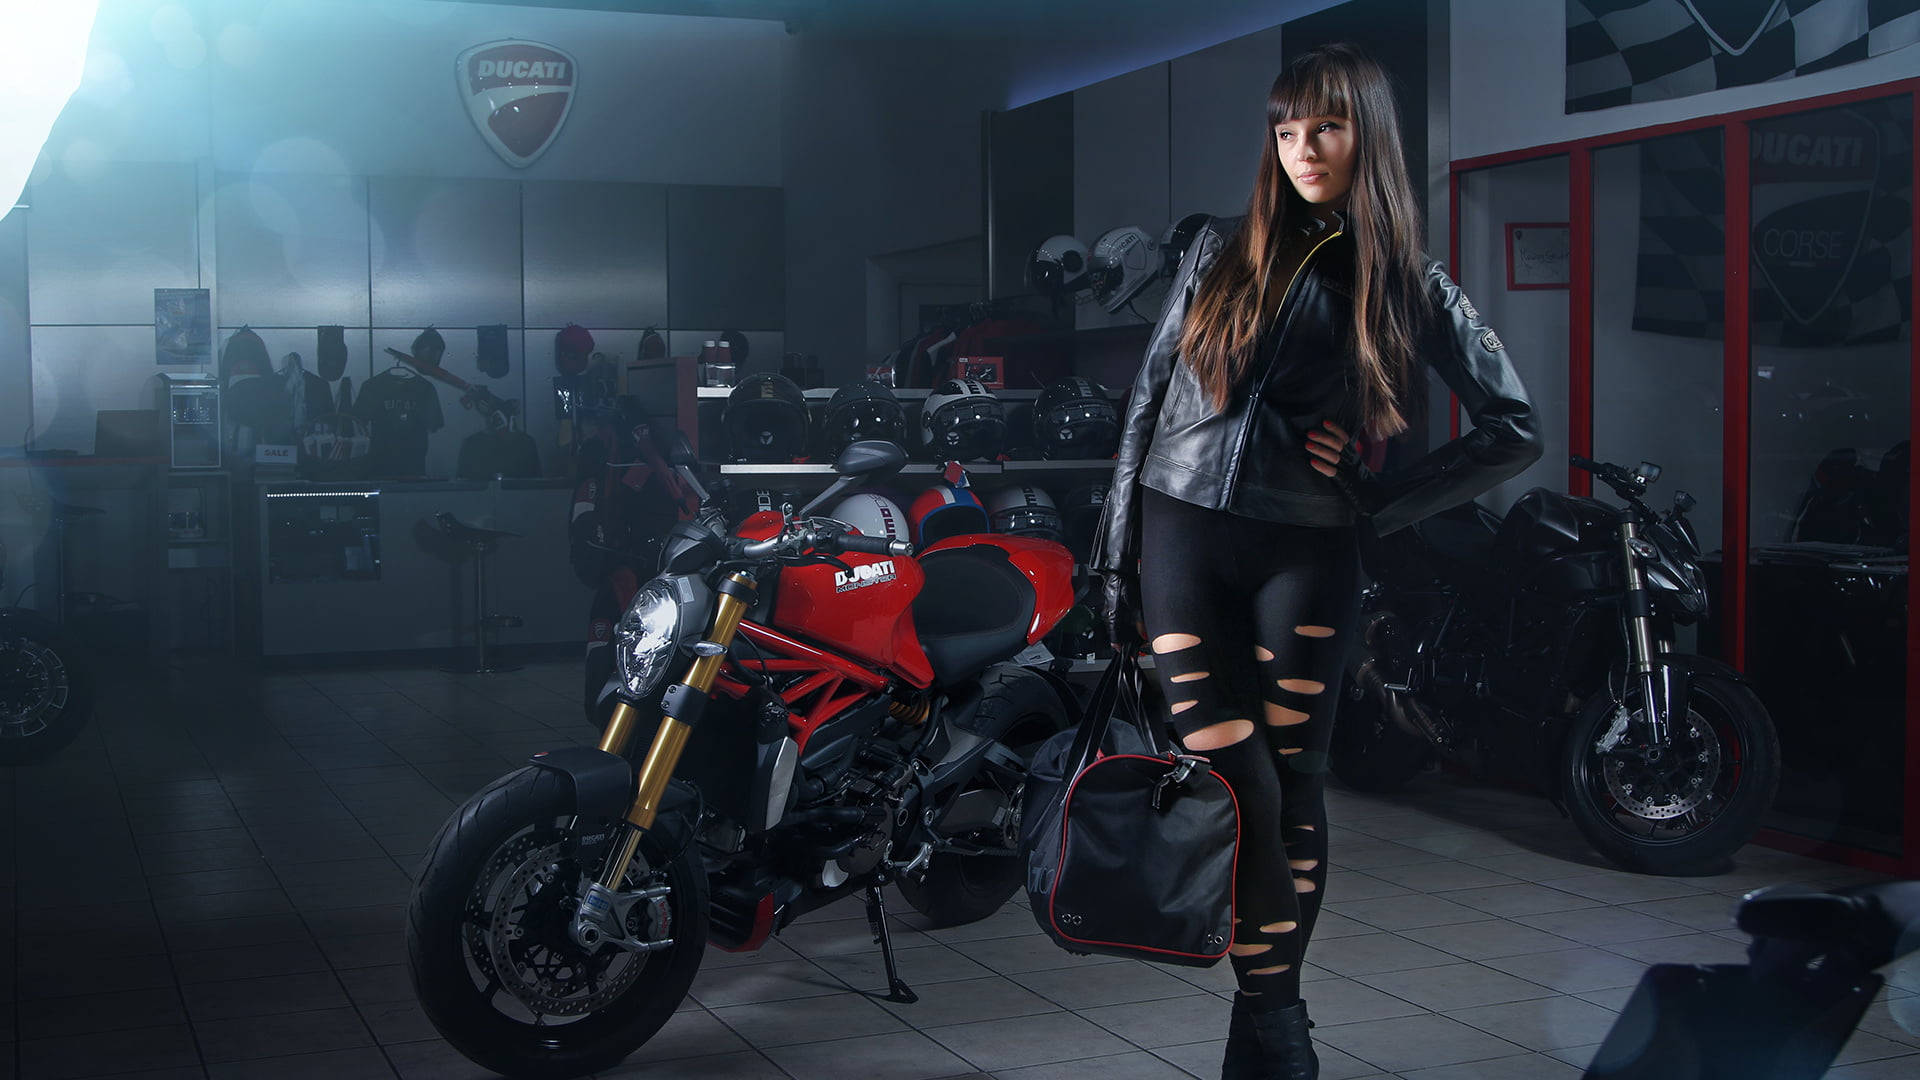 High-octane Style - Get All the Latest Gear at a Ducati Store Wallpaper